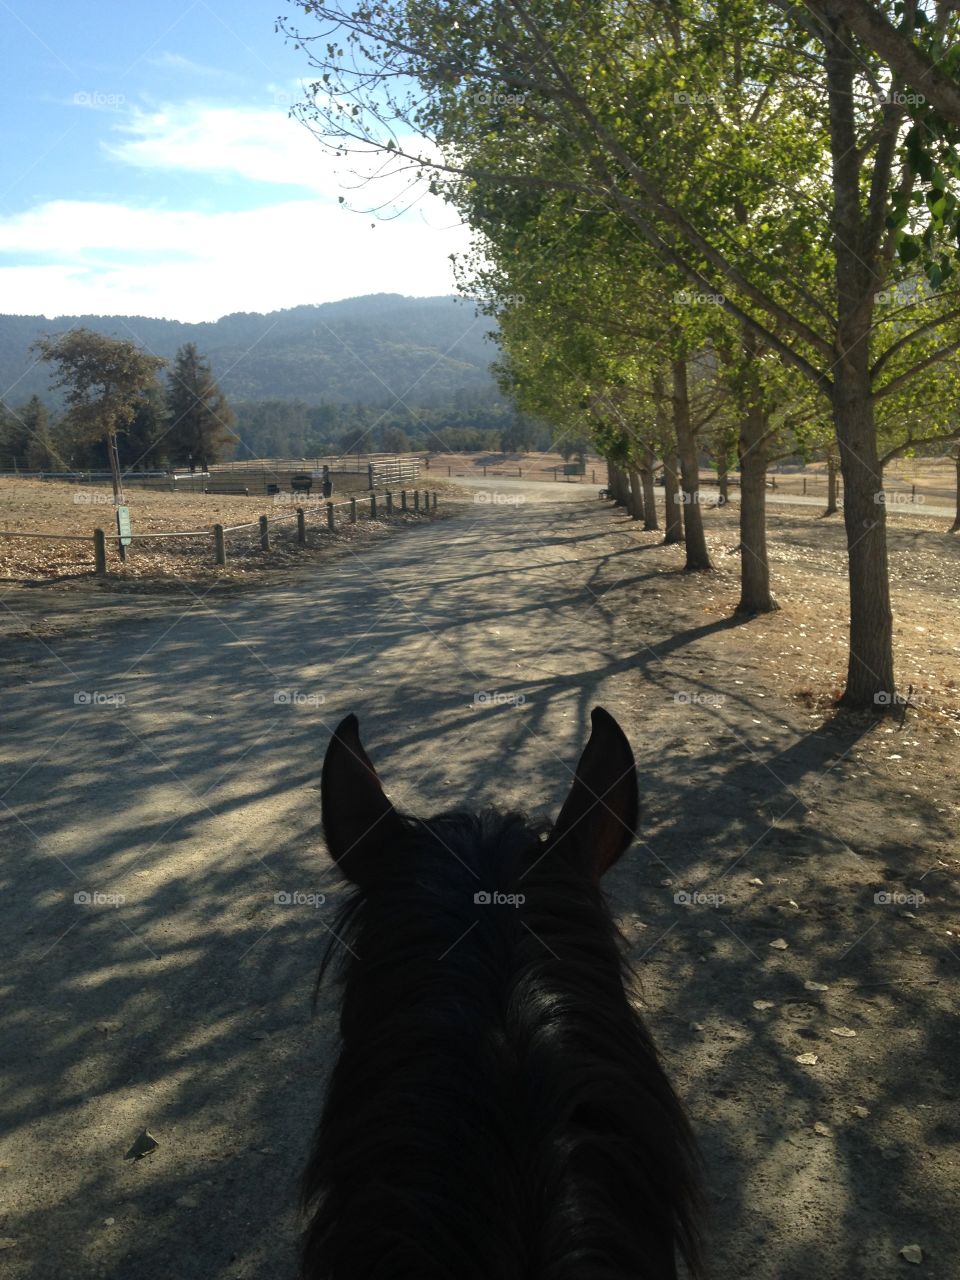 Everything looks more beautiful between a horse's ears